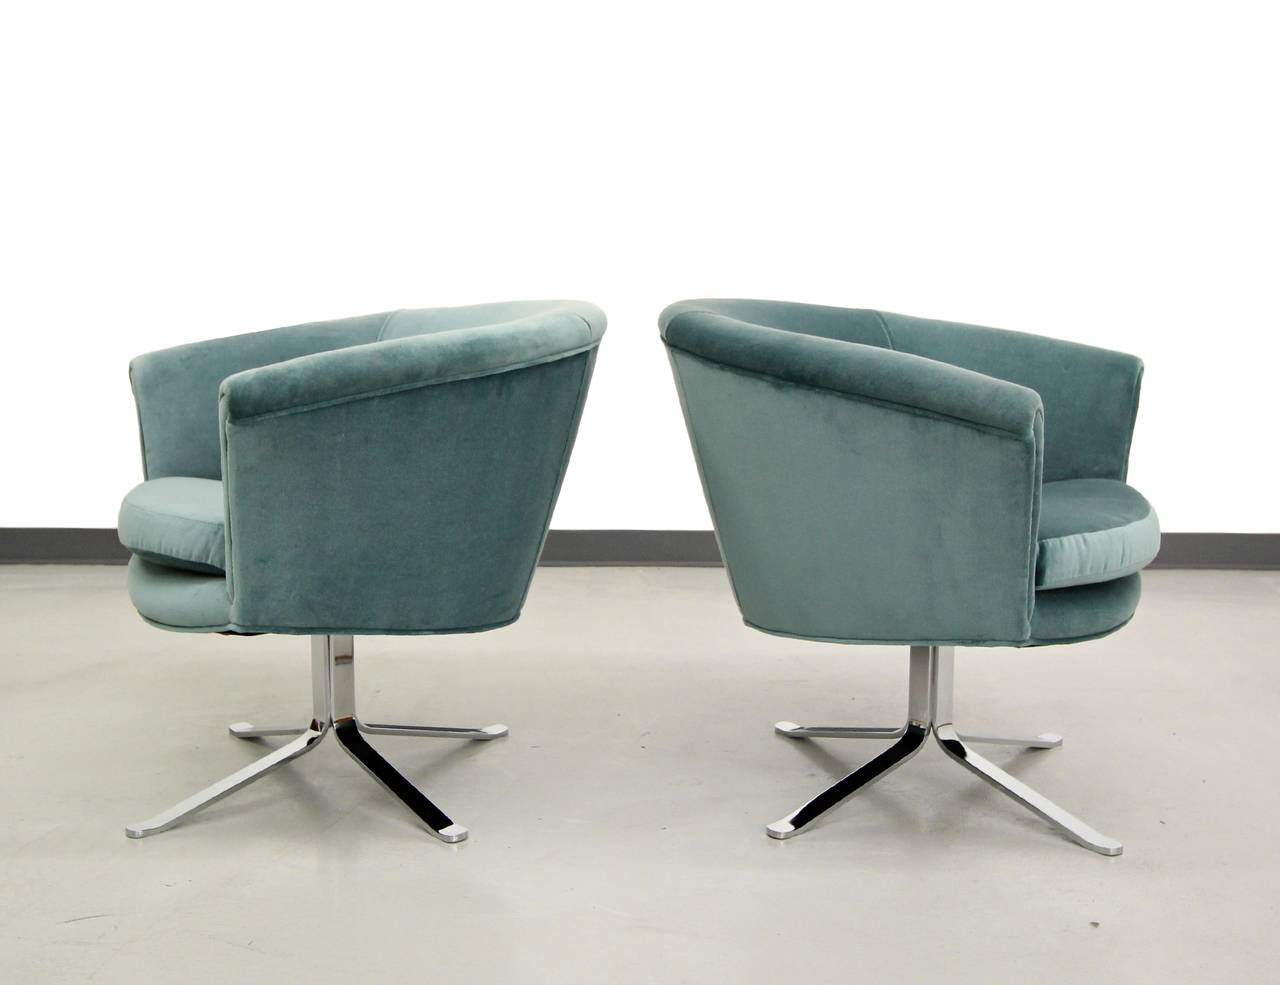 Beautiful pair of seafoam velvet swivel chairs with mint condition chrome bases attributed to Nicos Zographos.